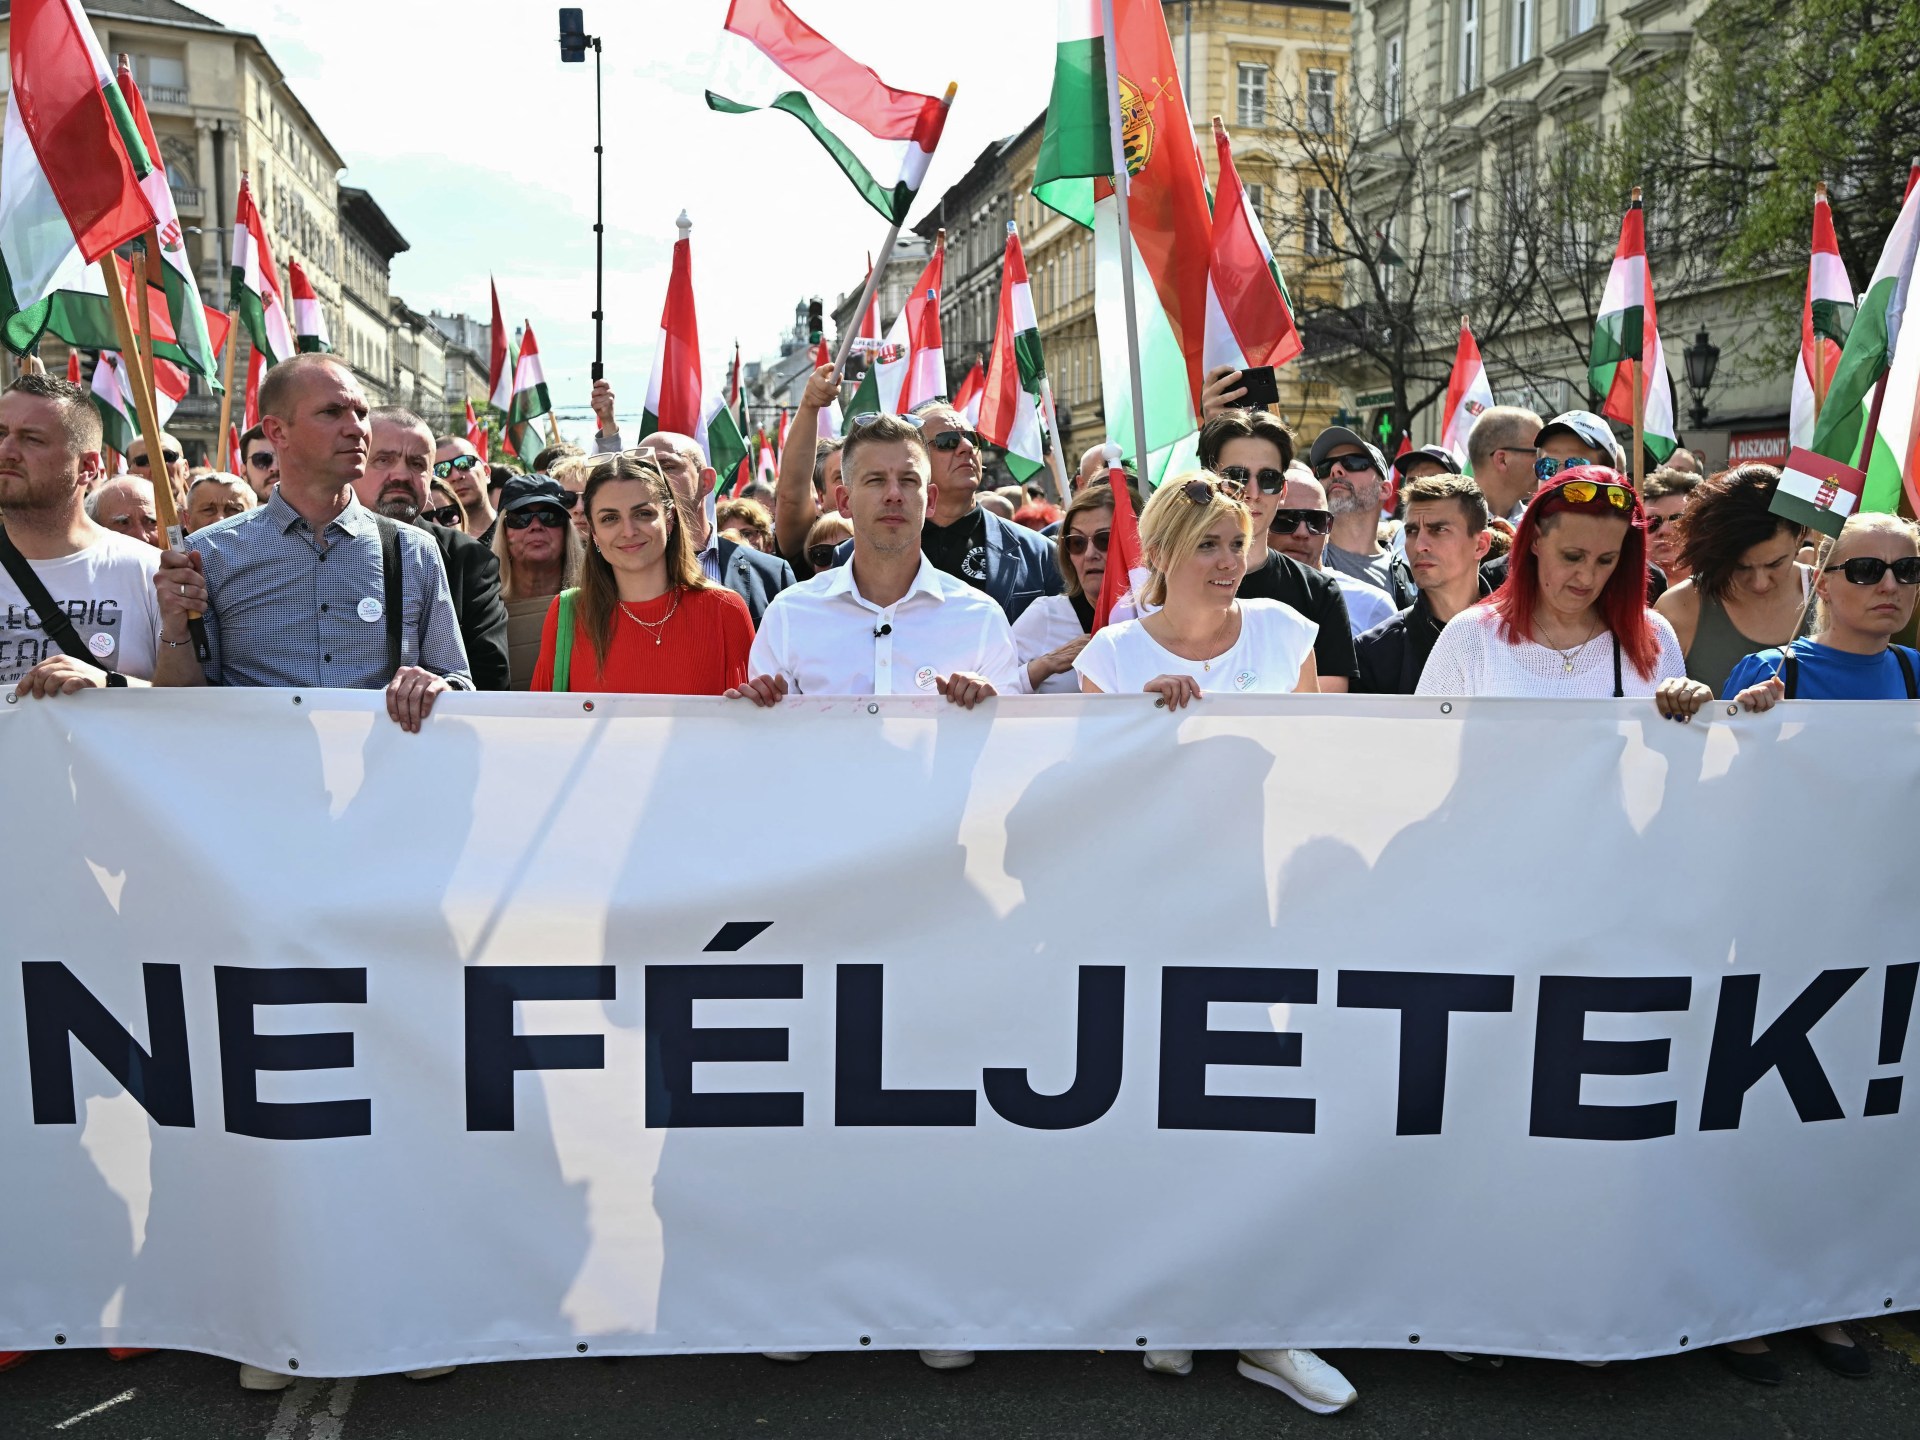 Thousands demonstrate in anti-Orban protest in Hungary | Protests News